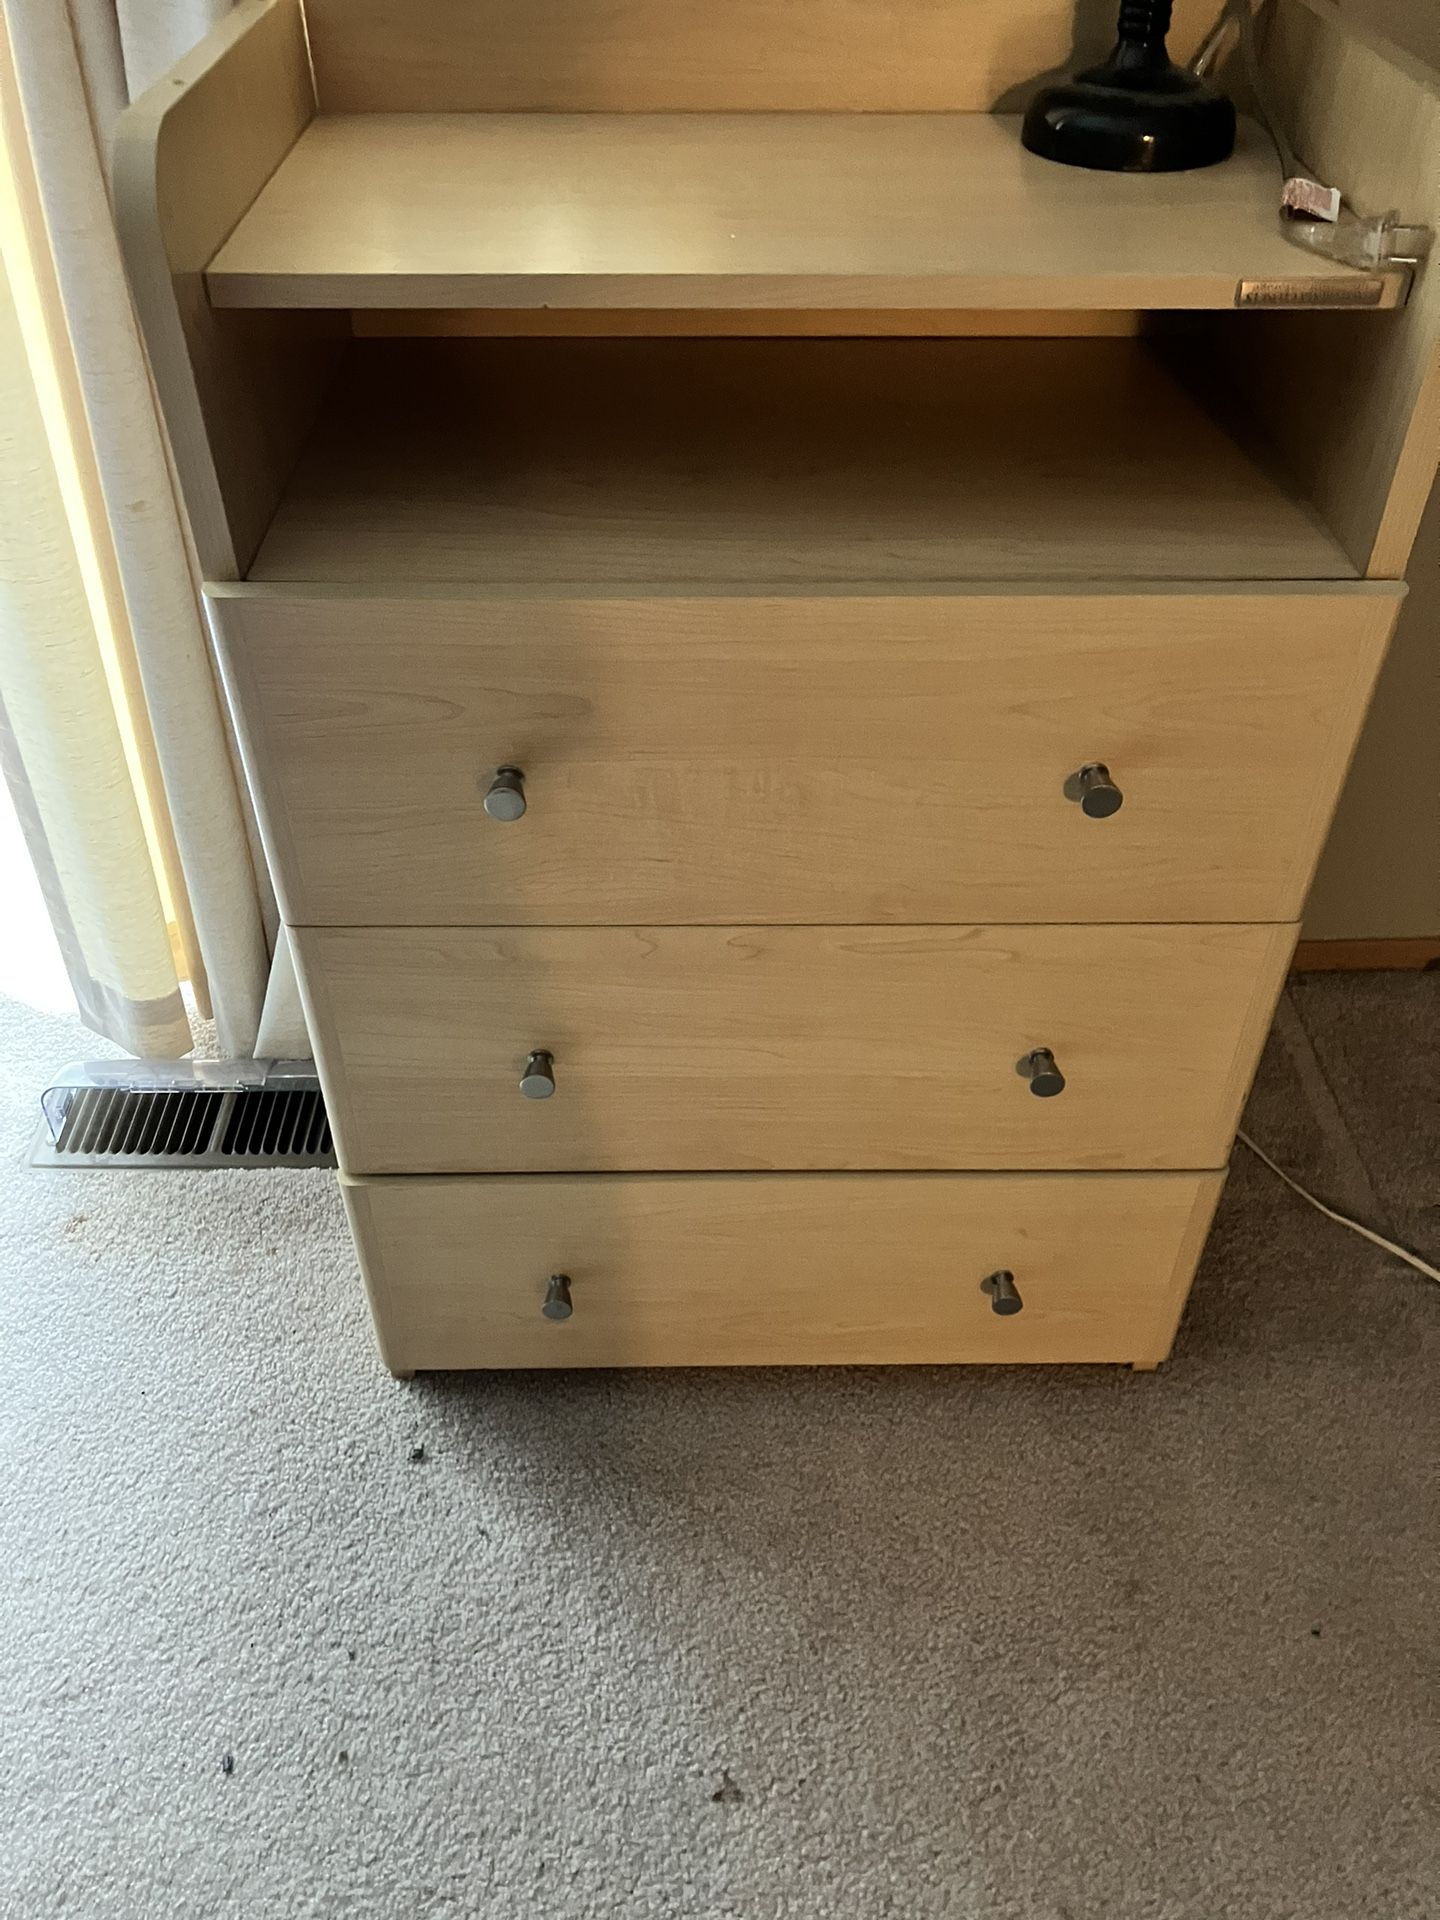 Dresser drawers / Changing table?